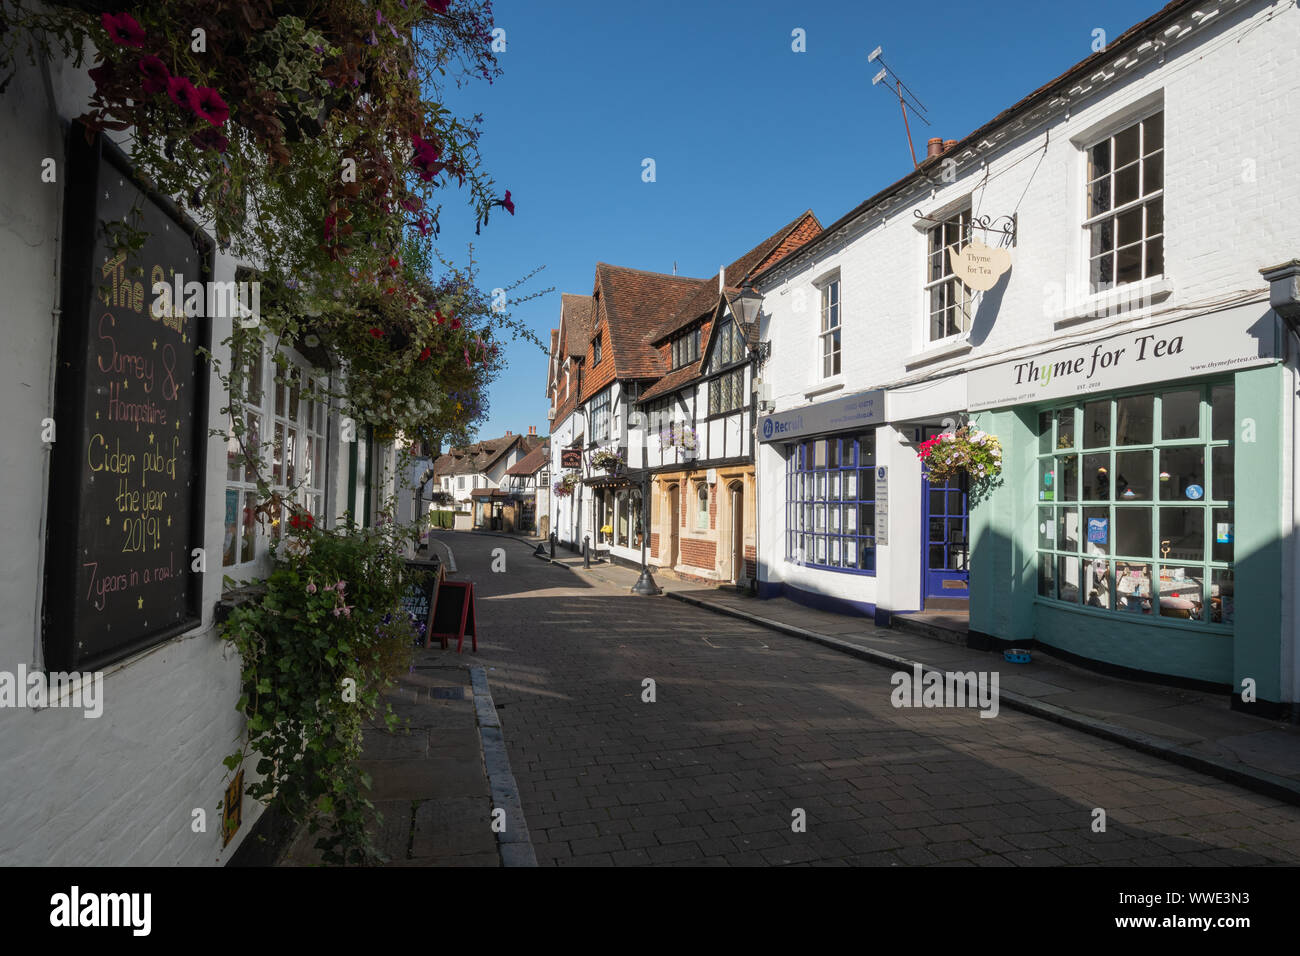 Picturesque Church Street in Godalming town centre, Surrey, UK, with the Star Inn, tea rooms and shops Stock Photo